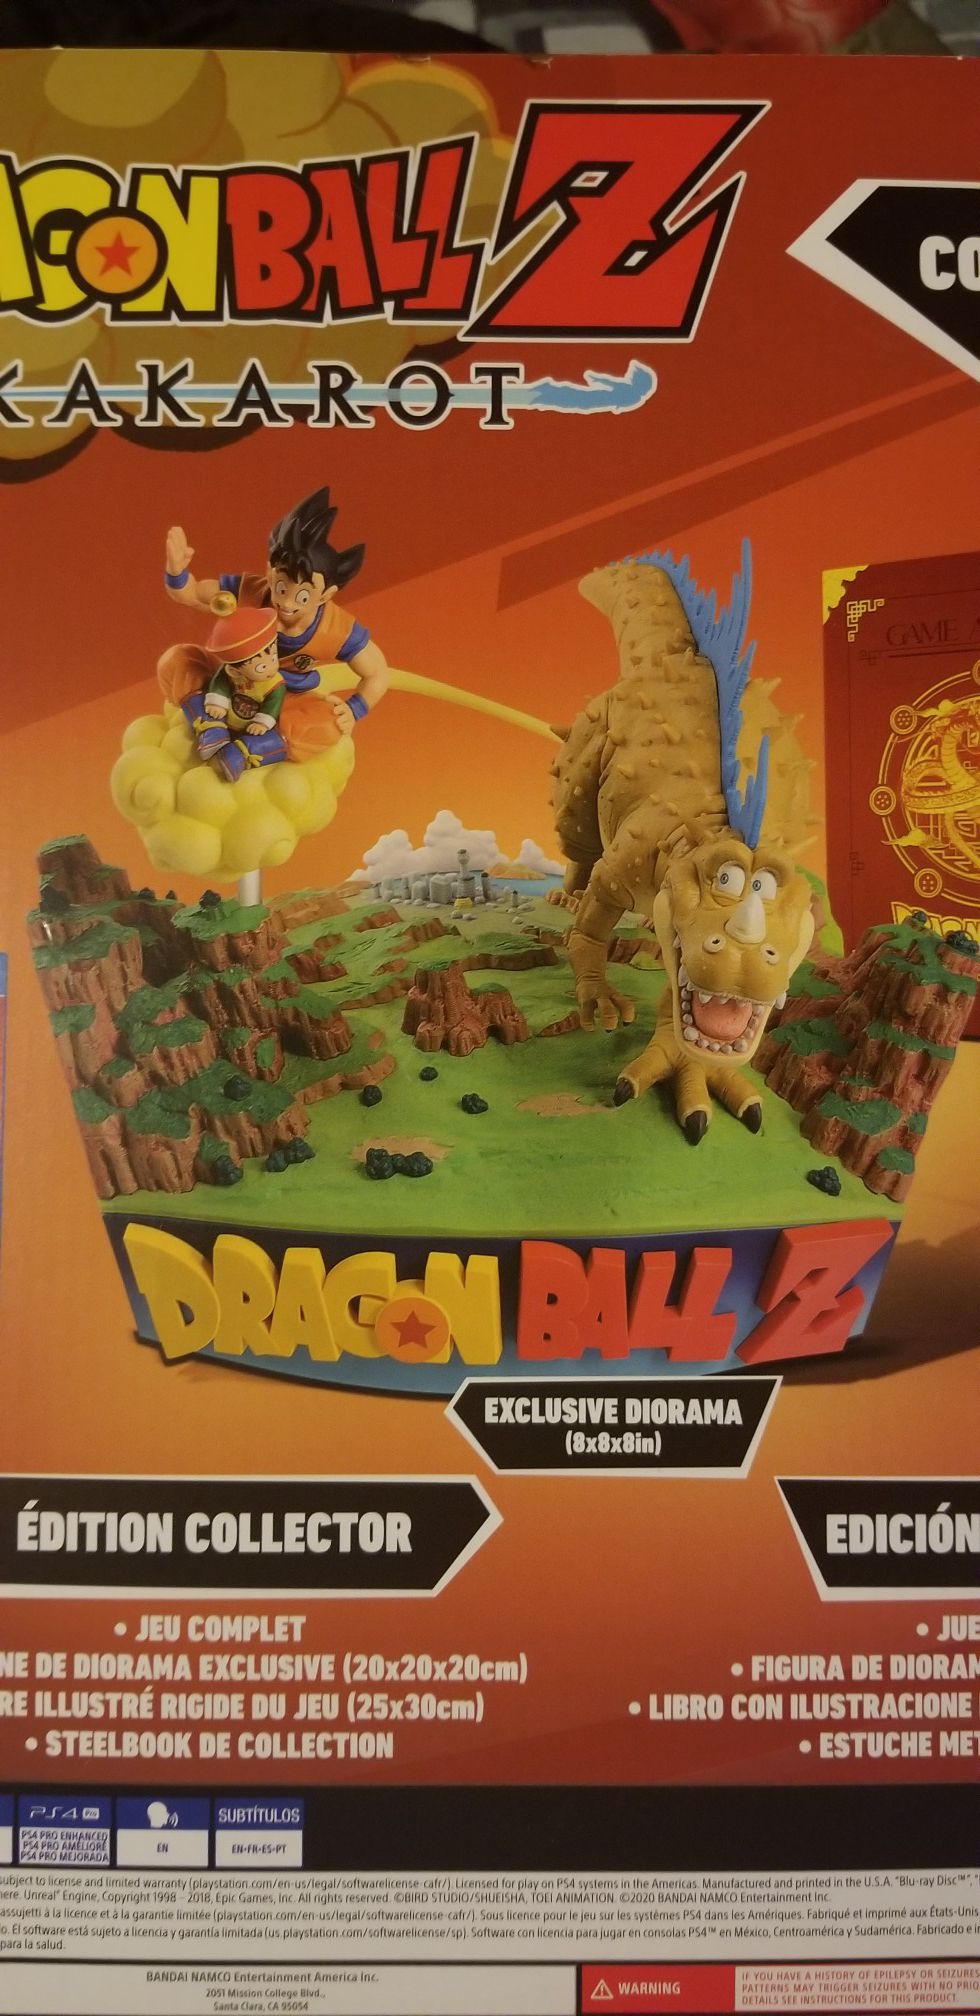 DragonBall Z Kakarot Collector's Edition DIORAMA STATUE ONLY